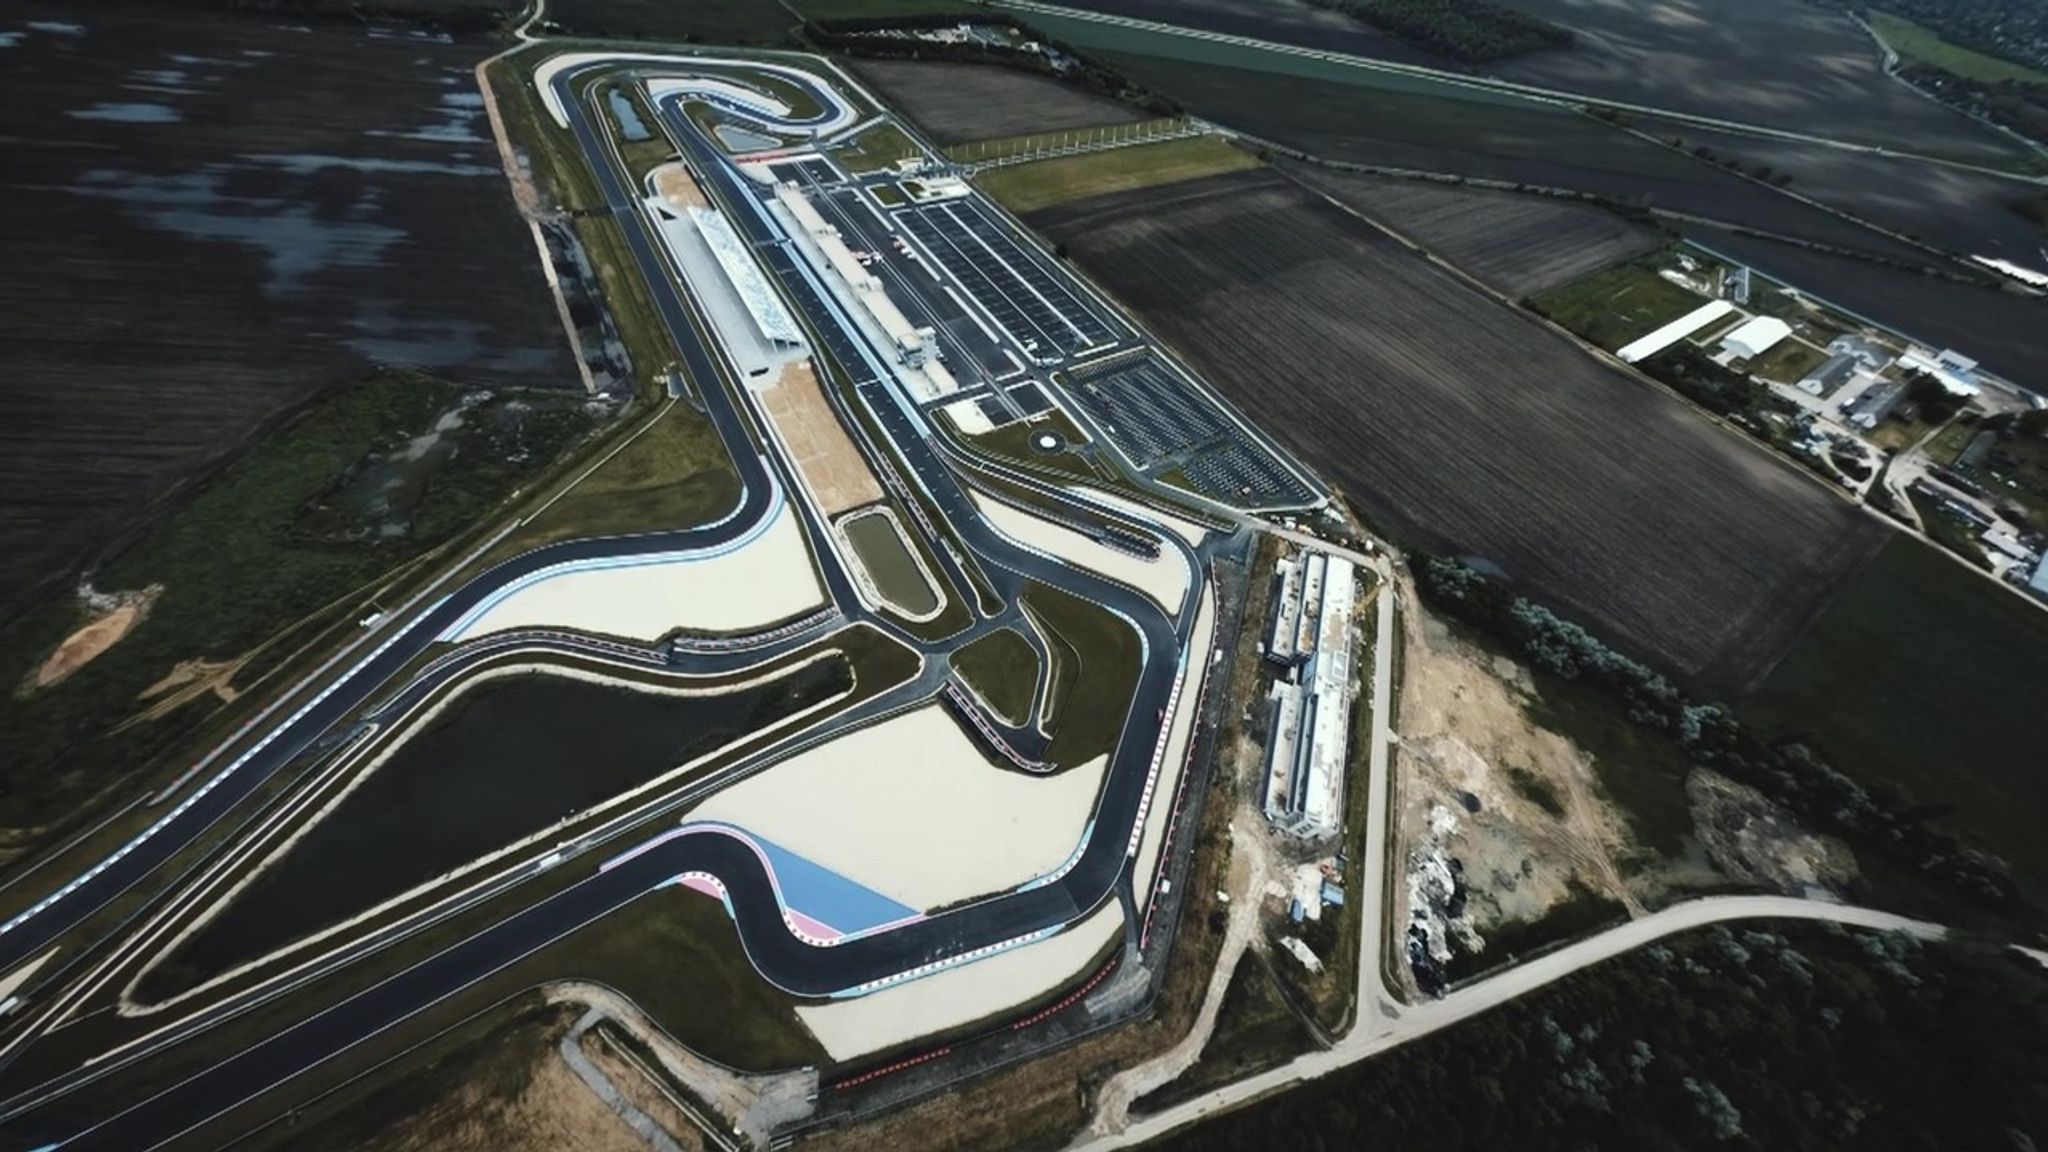 Balaton Park Inside Europes first new purpose built motorsport track for a decade F1 News